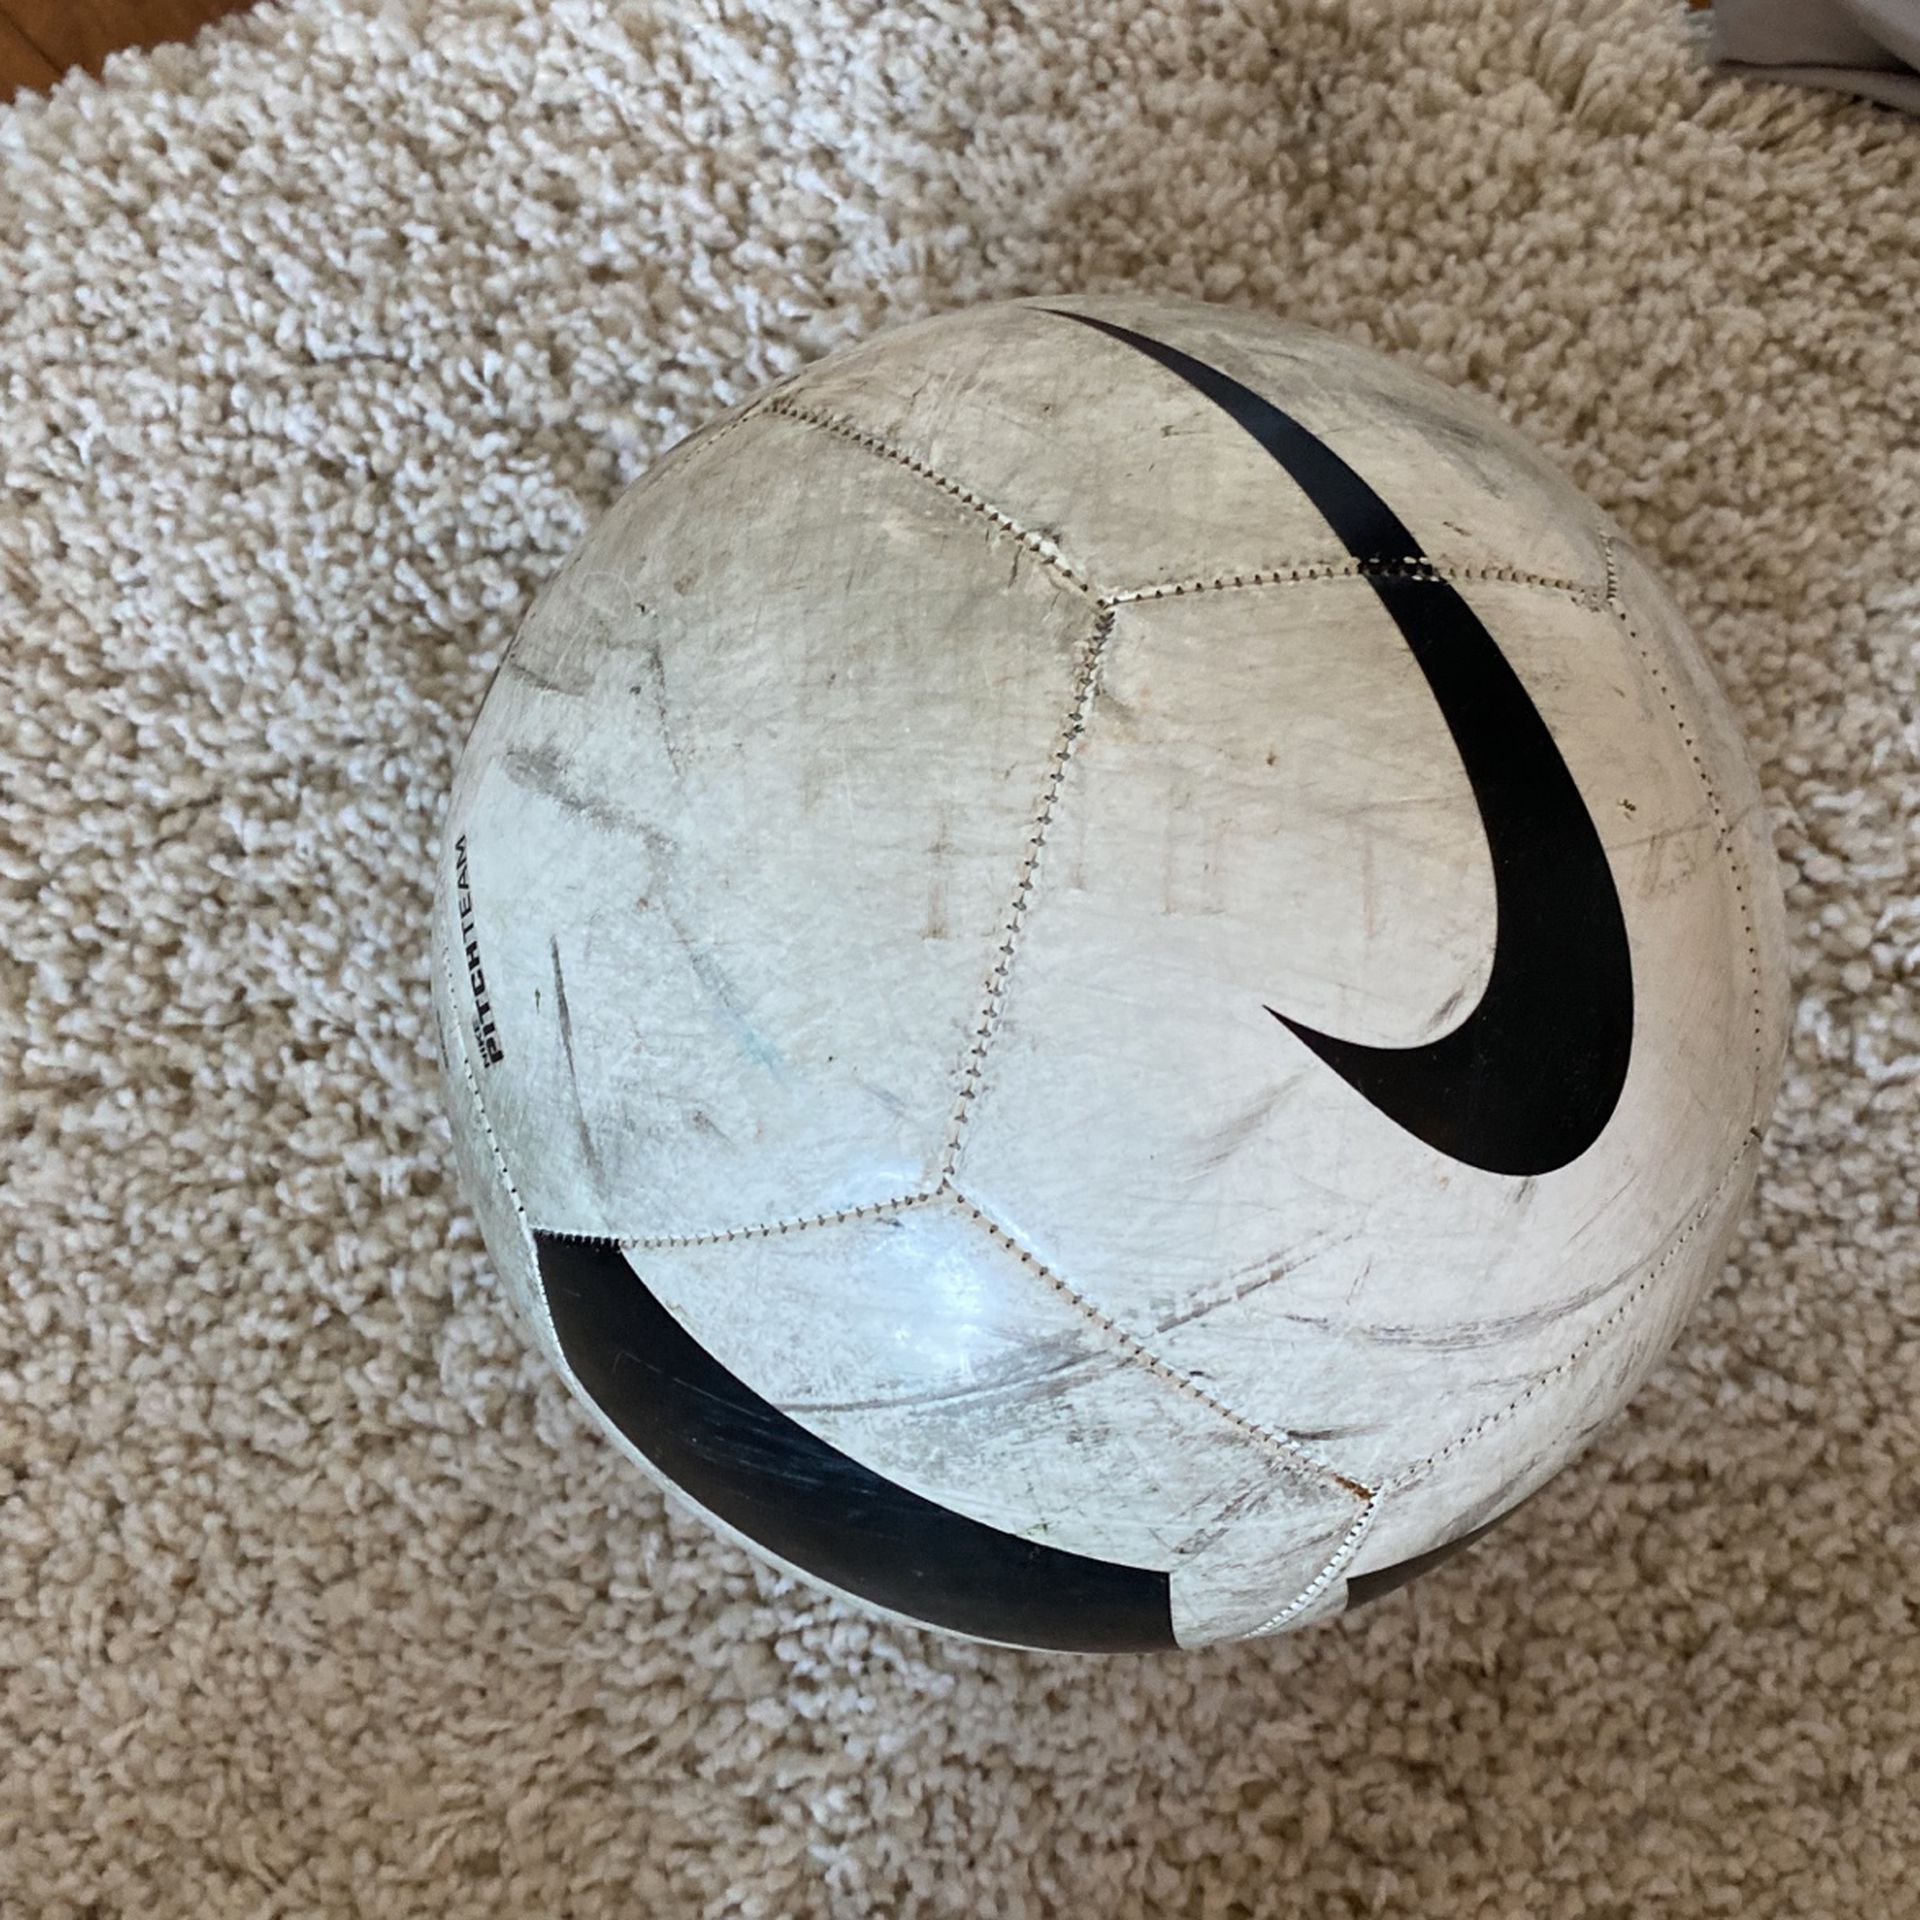 4 Count Size 5 Soccer Balls